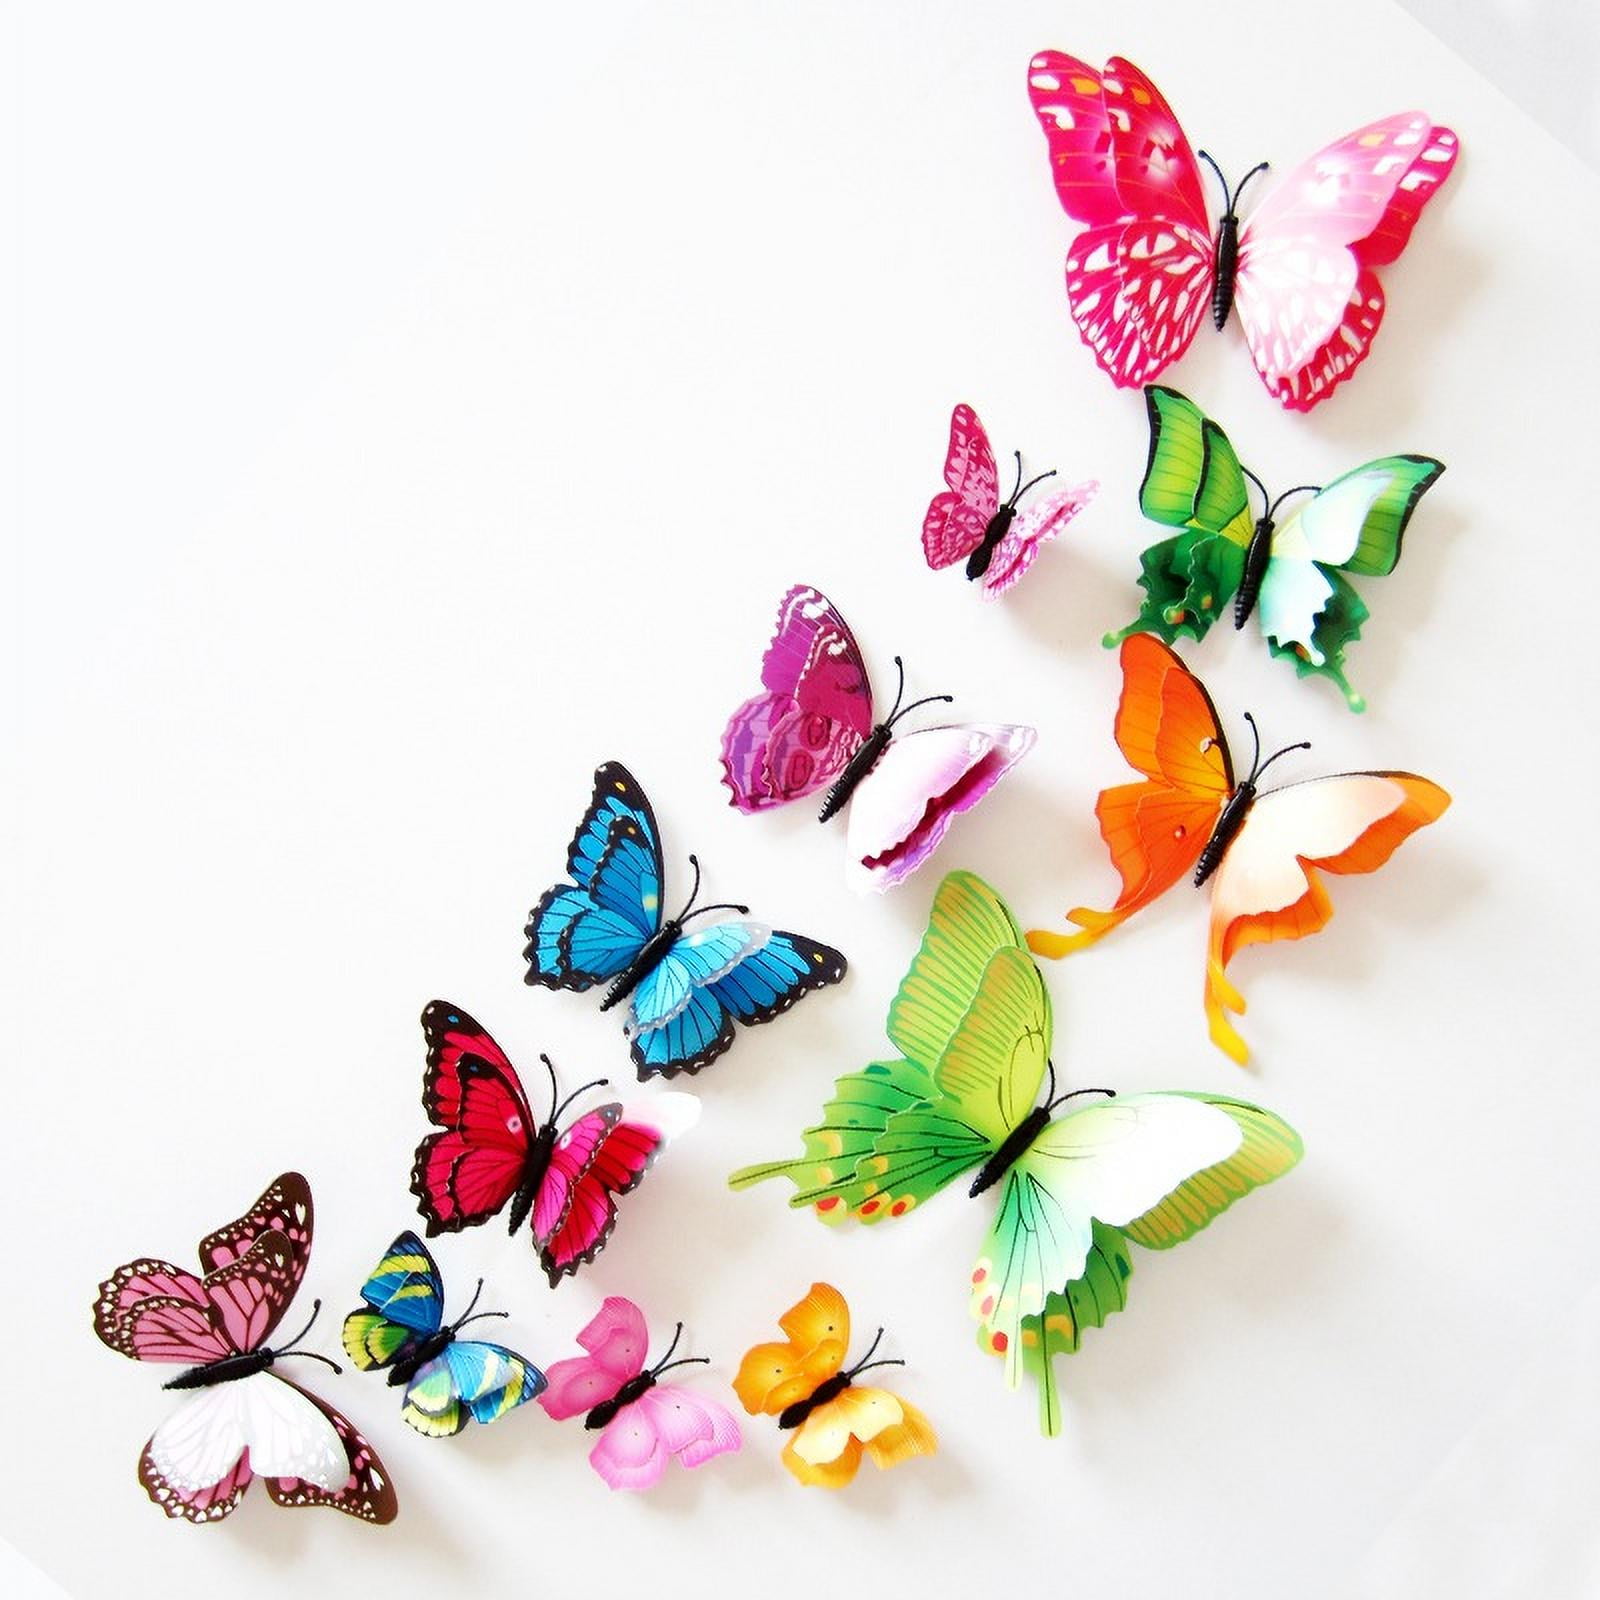 3D Butterfly 12 pc Decal Wall Stickers Home Decorations Green & Rainbow Wing USA 